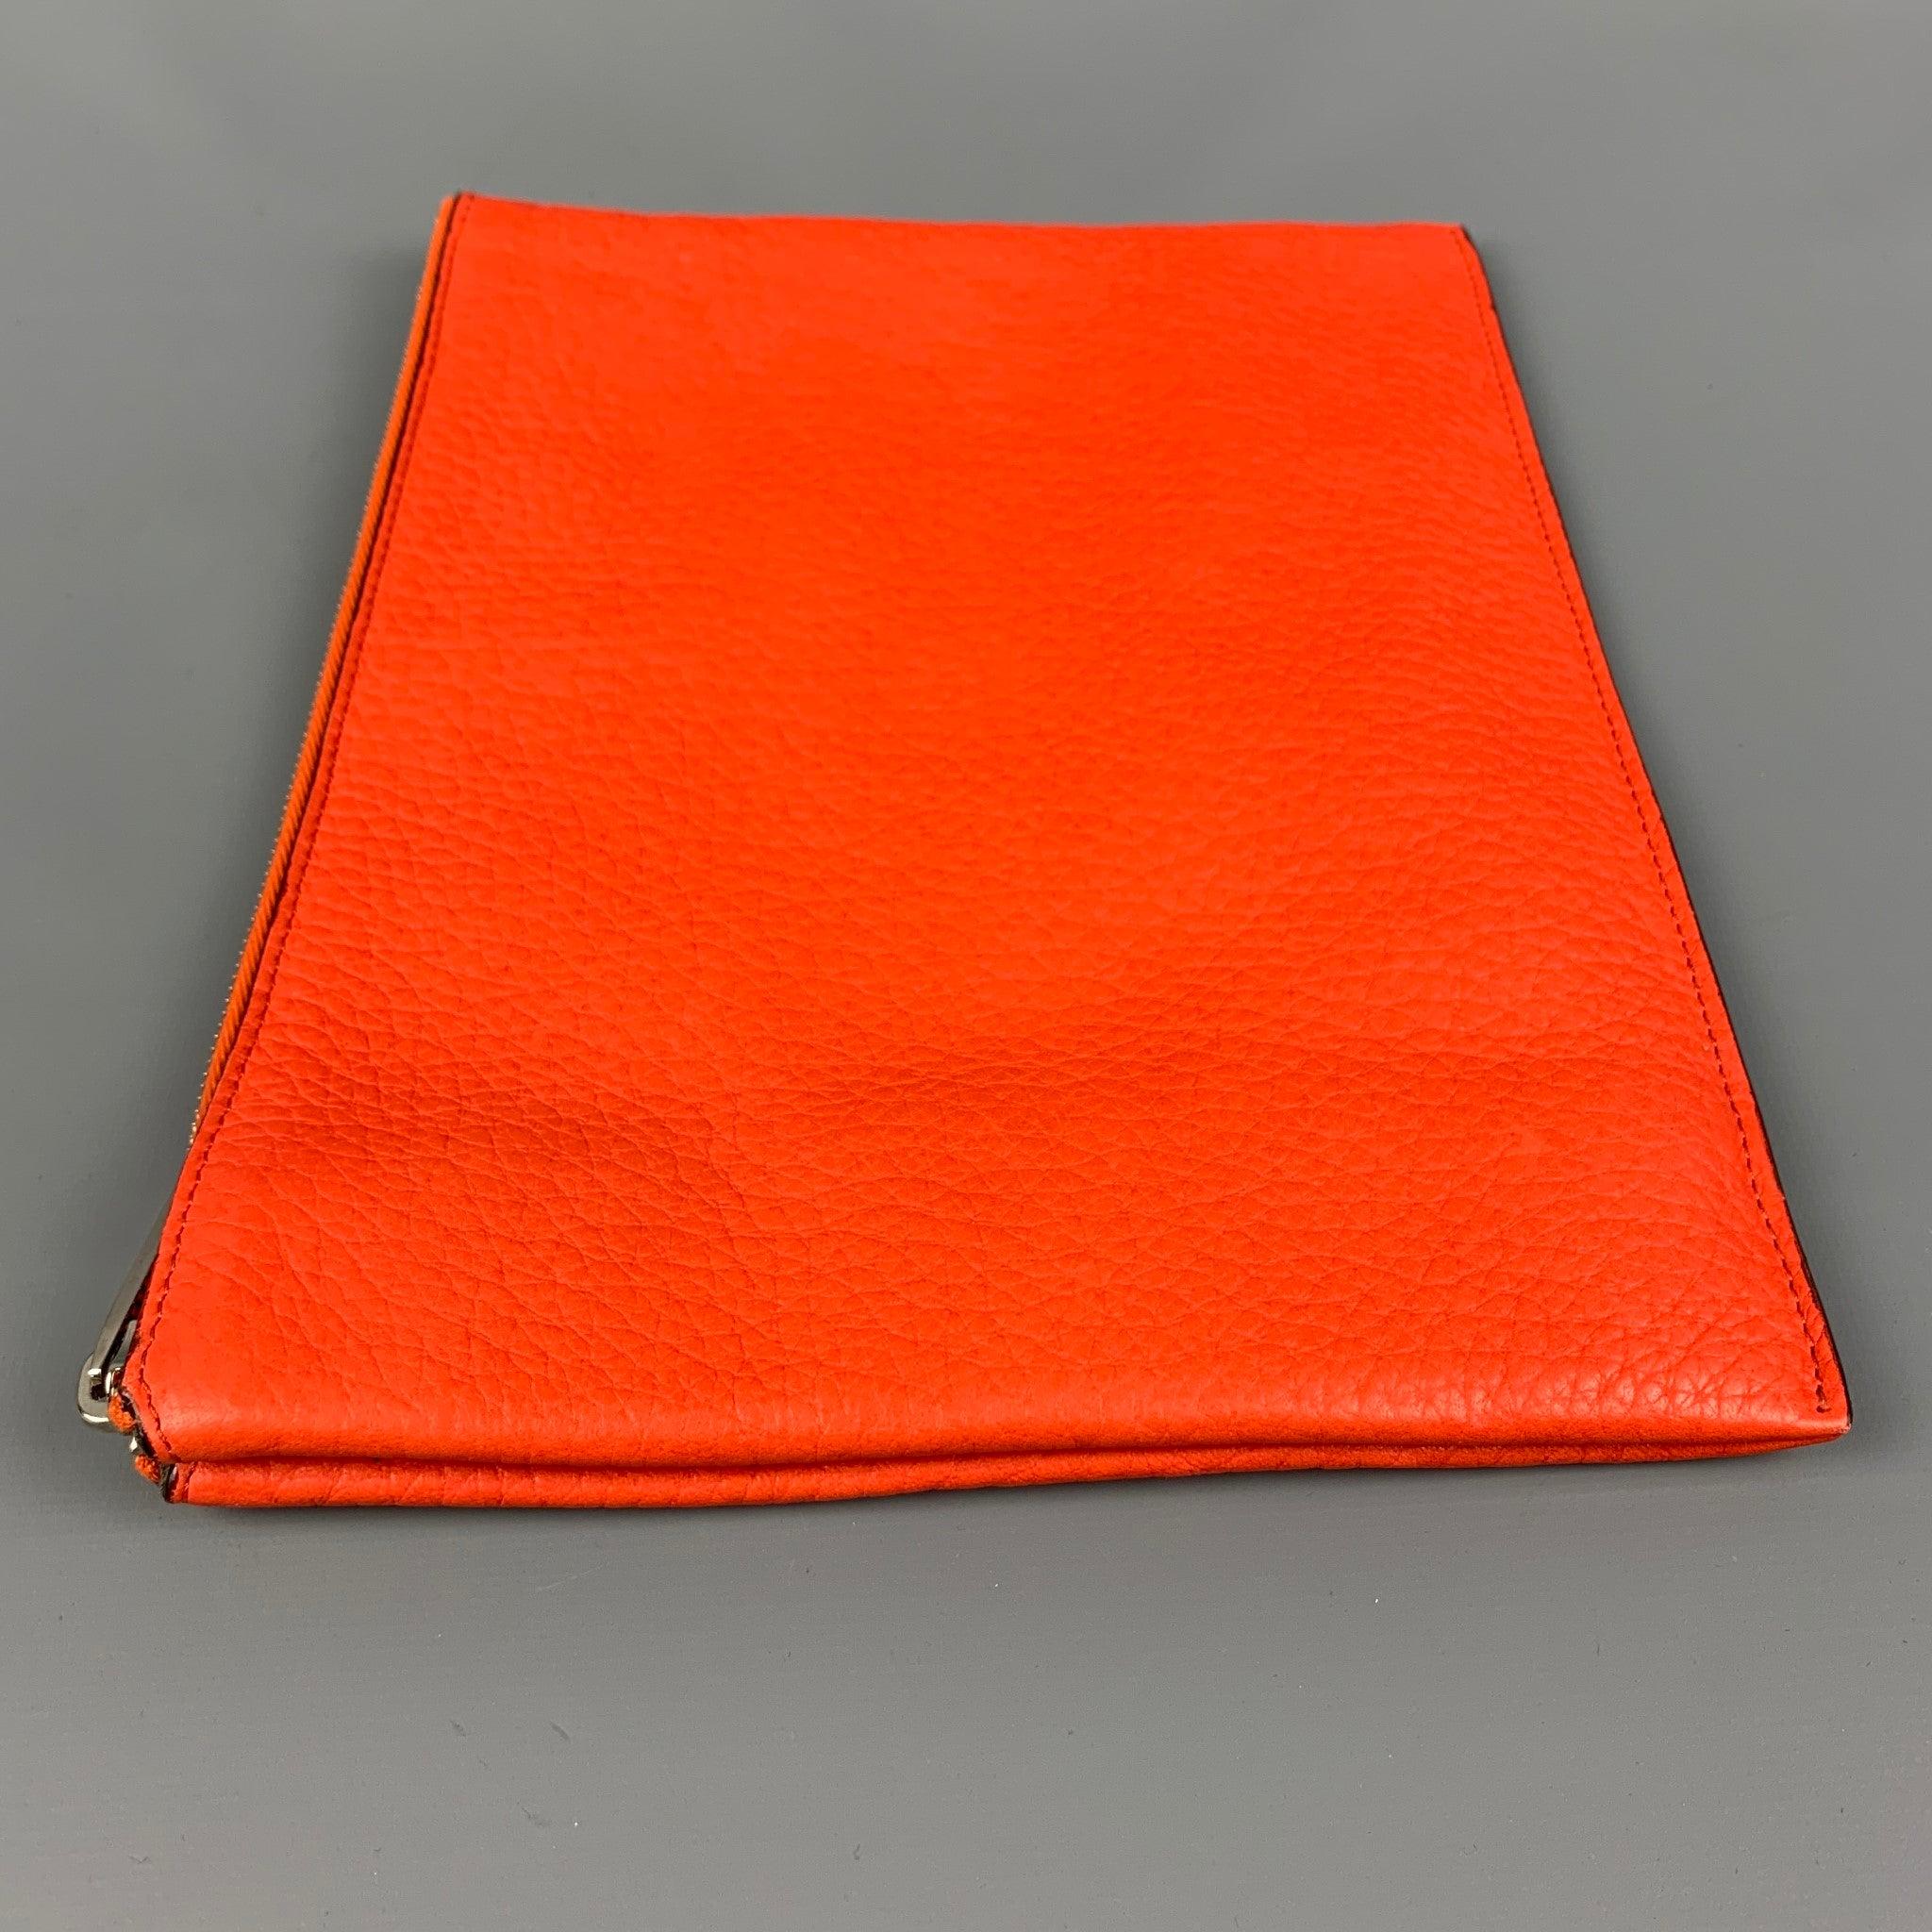 Red CALVIN KLEIN COLLECTION Orange Textured Leather Pouch Bag